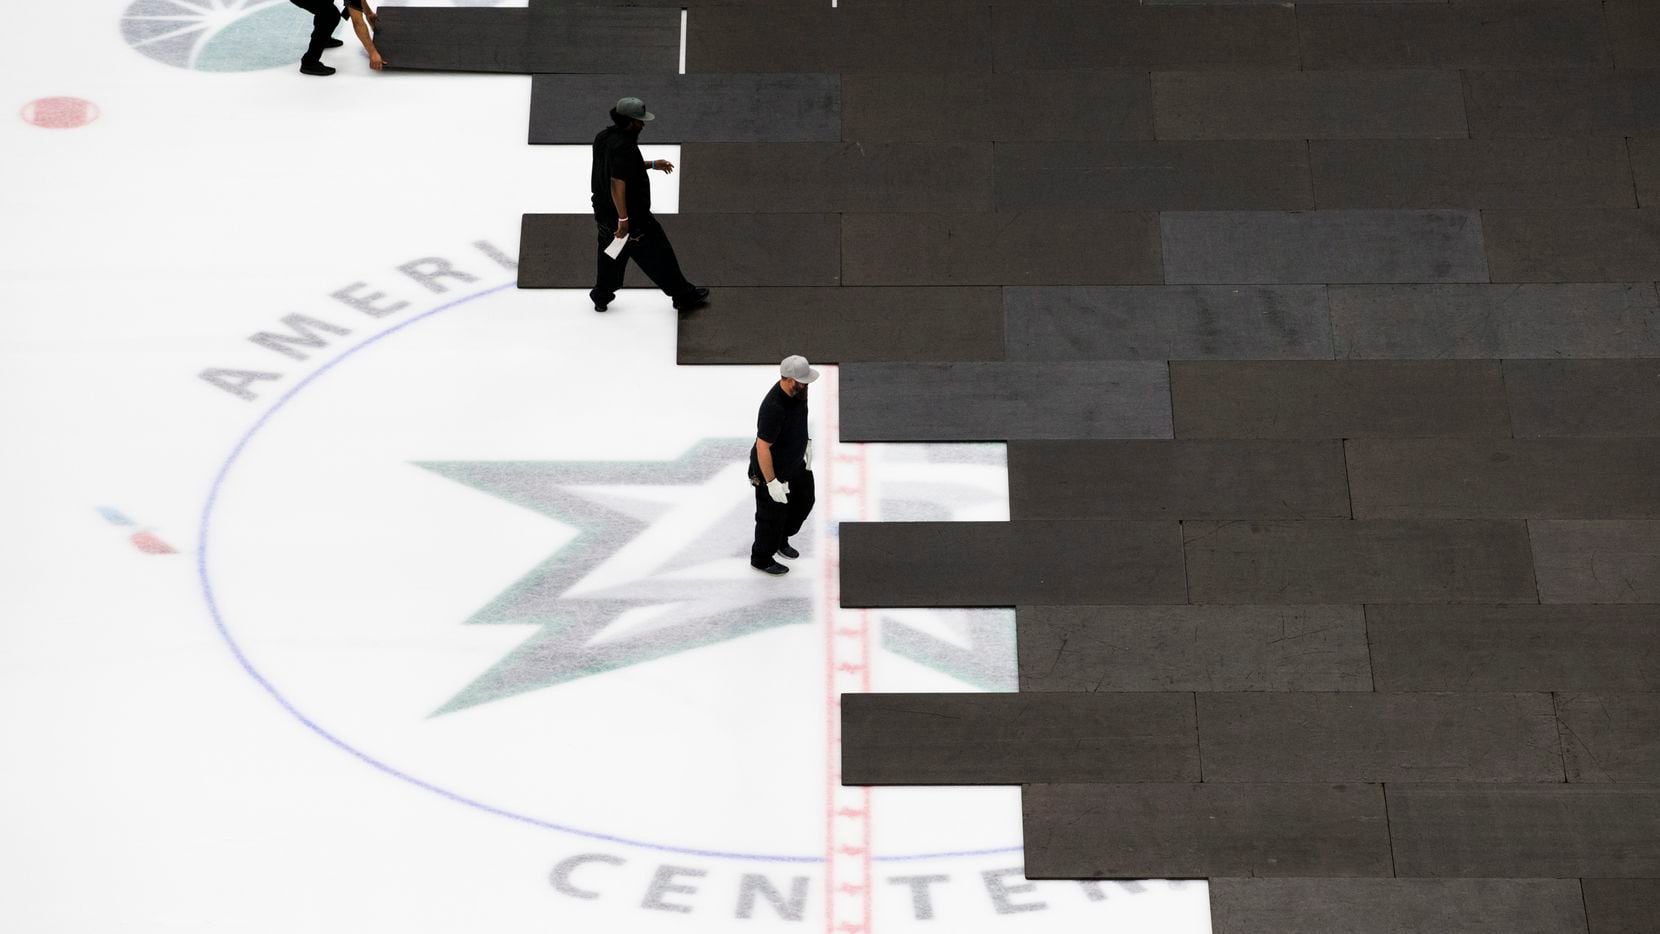 Crews cover the Dallas Stars ice after the NHL season was put on hold due to coronavirus on Thursday, March 12, 2020 at American Airlines Center in Dallas.